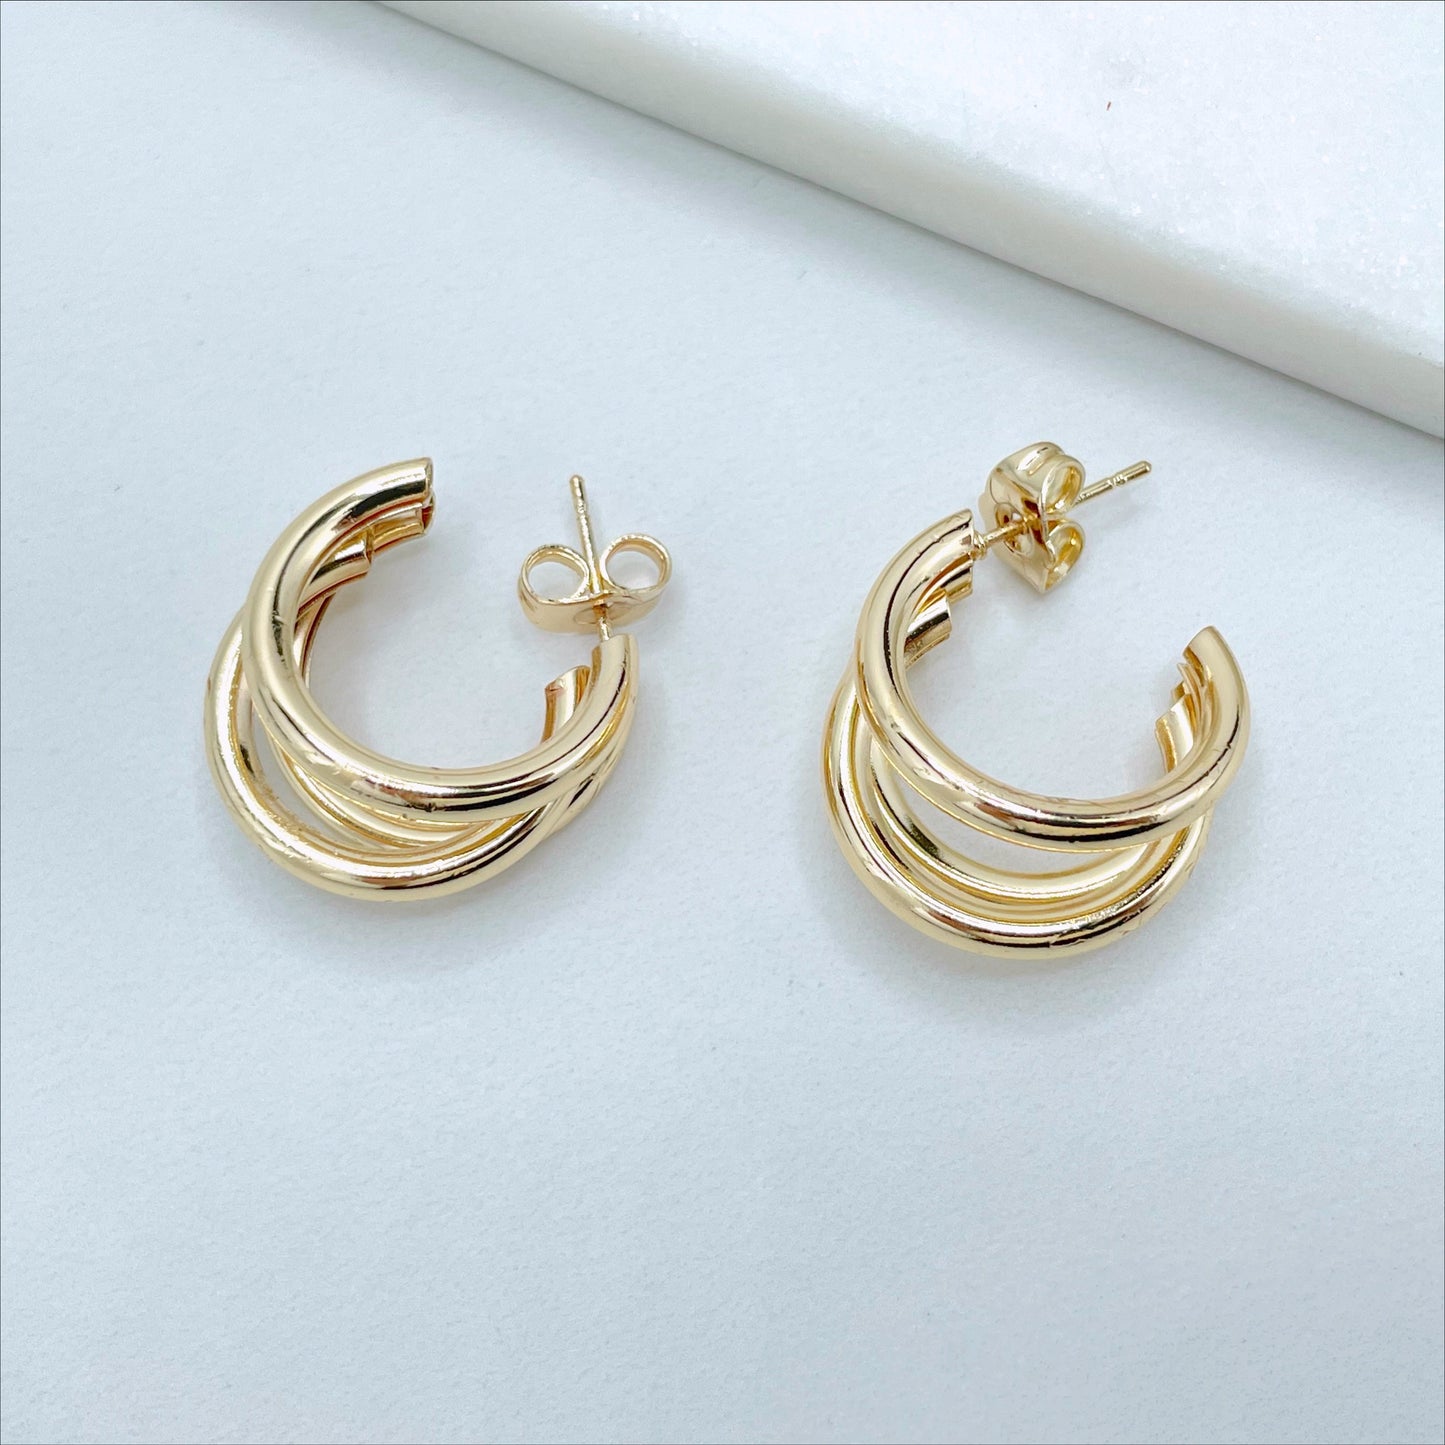 18k Gold Filled 20mm or 25mm Tubular Braided C-Hoop Earrings, Wholesale Jewelry Making Supplies